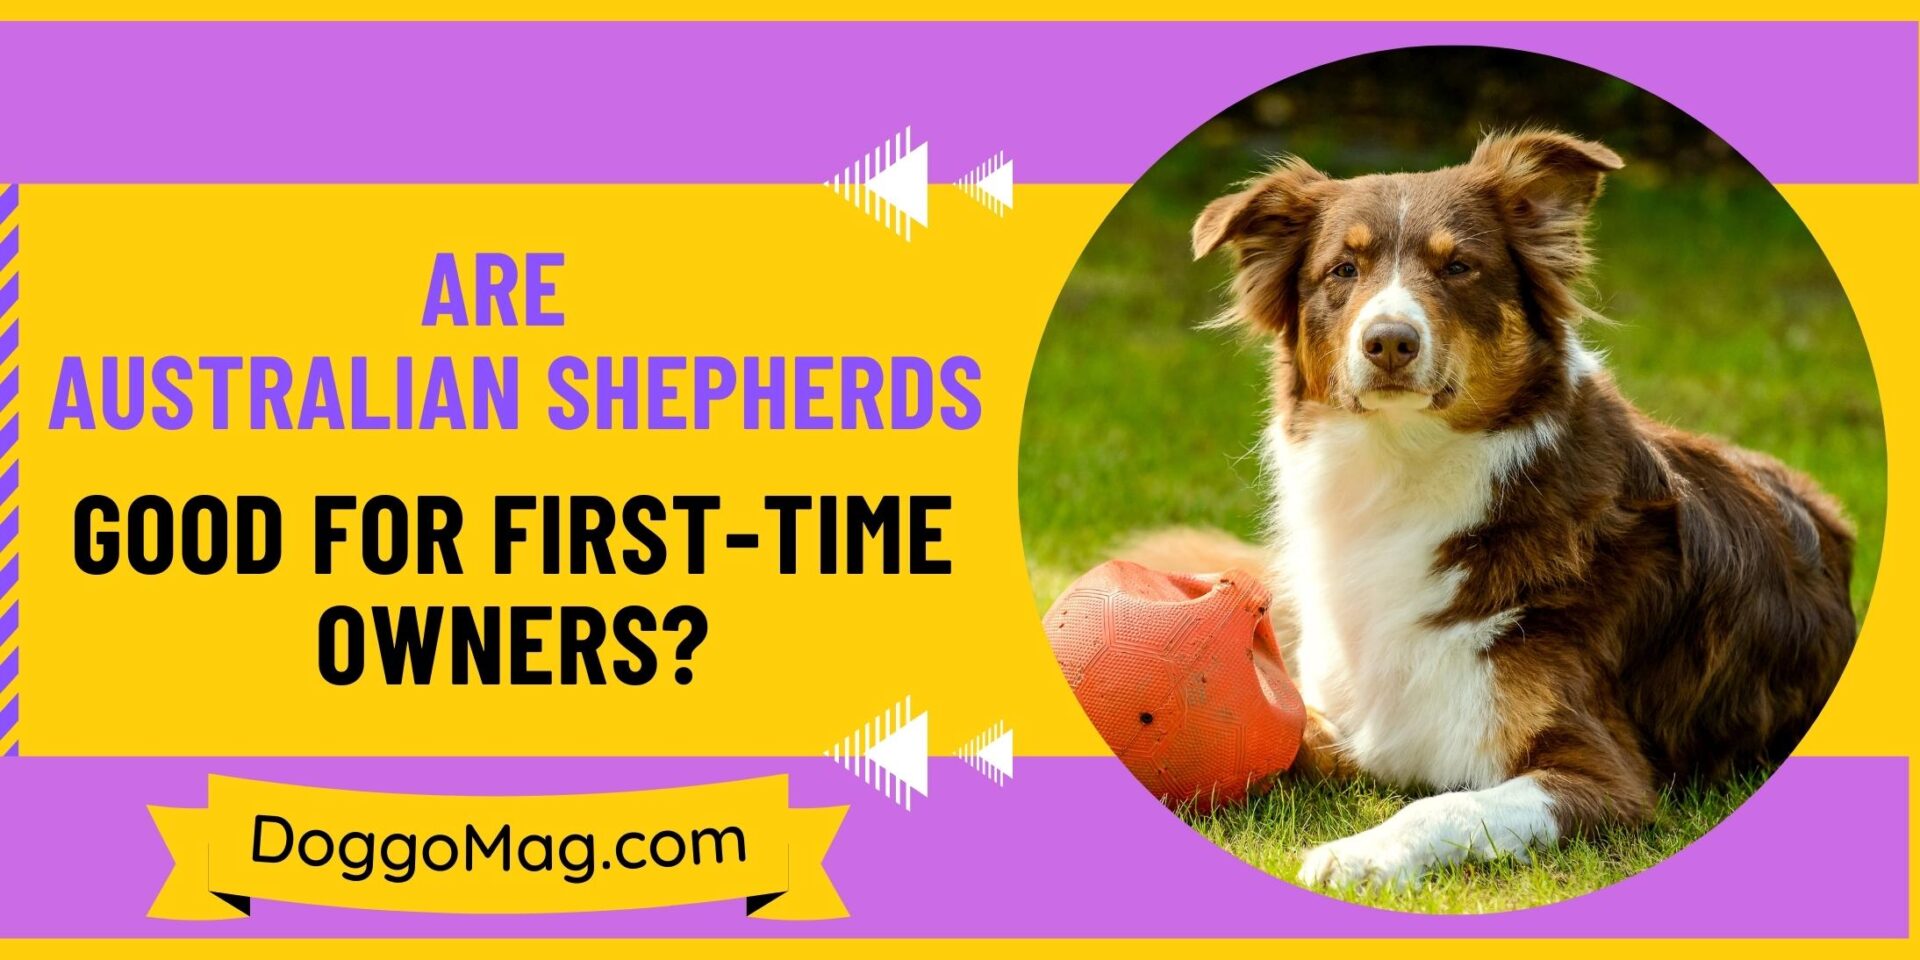 Are Australian Shepherds Good For First-Time Owners